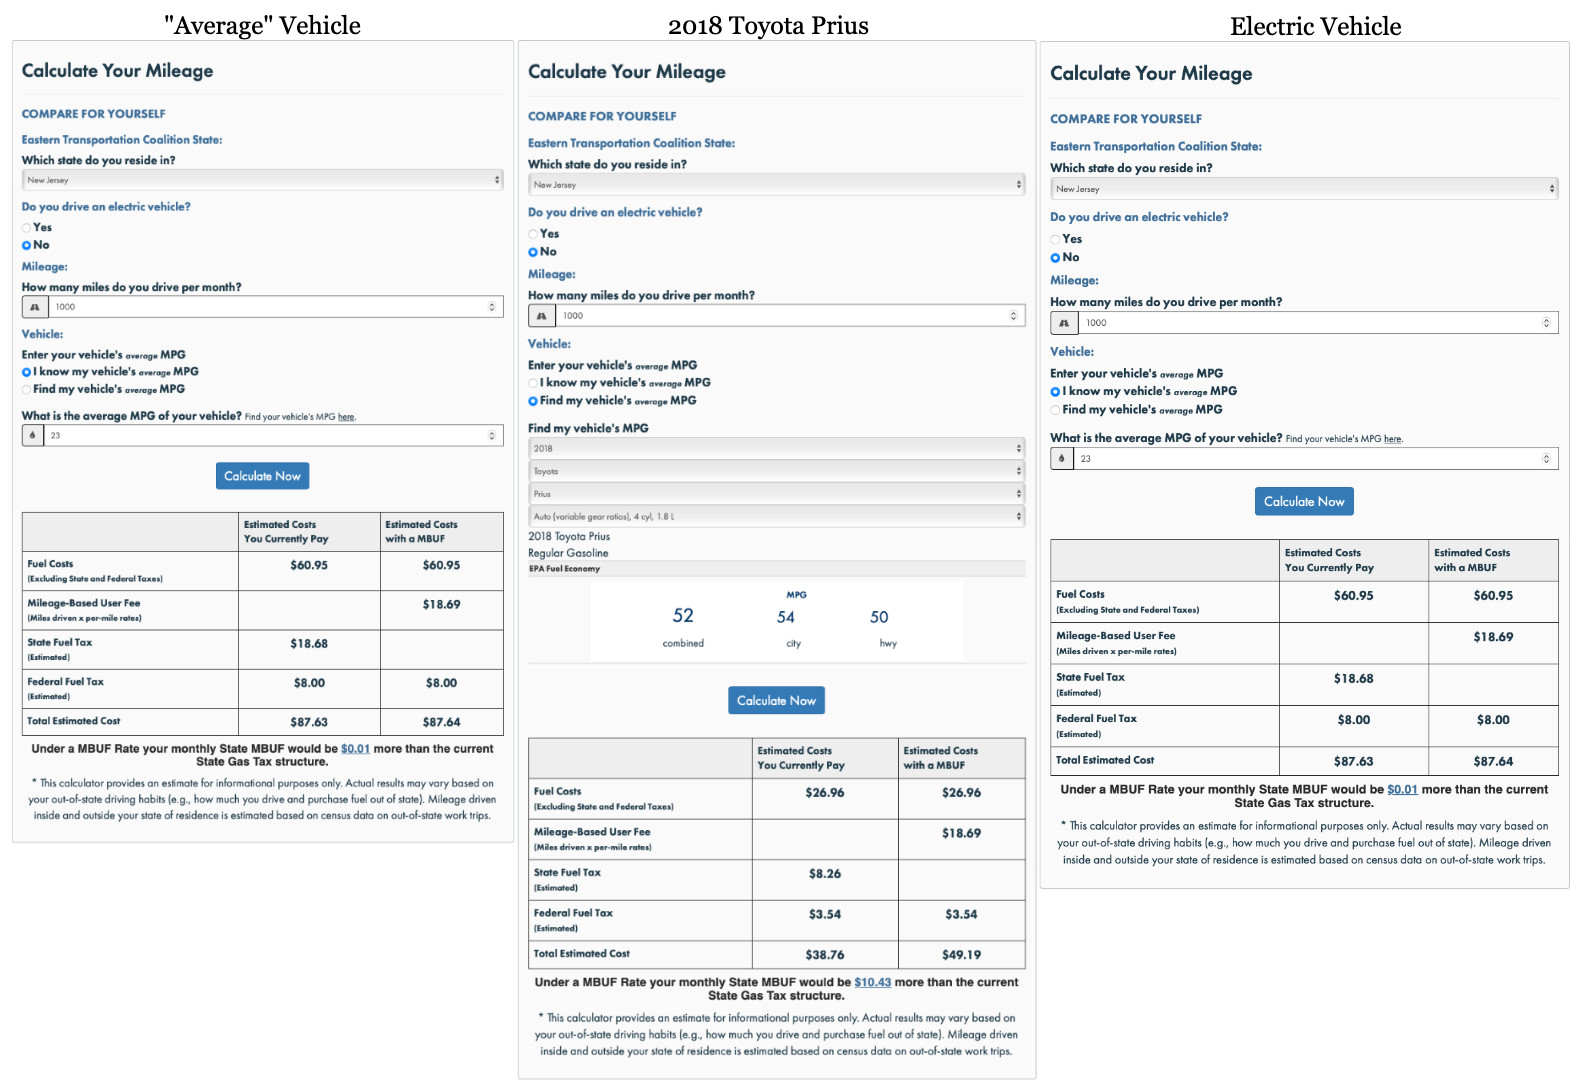 From Left to Right: Milage calculator tool for MBUF for average vehicle with 23 Miles per gallon, they would pay about one cent more in fees to drive 1000 miles. Second: Hybrid mileage calculation for 1000 miles with 2018 toyota prius, they would pay $10.43 more under MBUF than the $38.76 they currently pay, and third and finally: Mileage calculation for EV driving 1000 miles, they would have to pay an extra $18.69, and are paying $0 now using traditional gas tax.